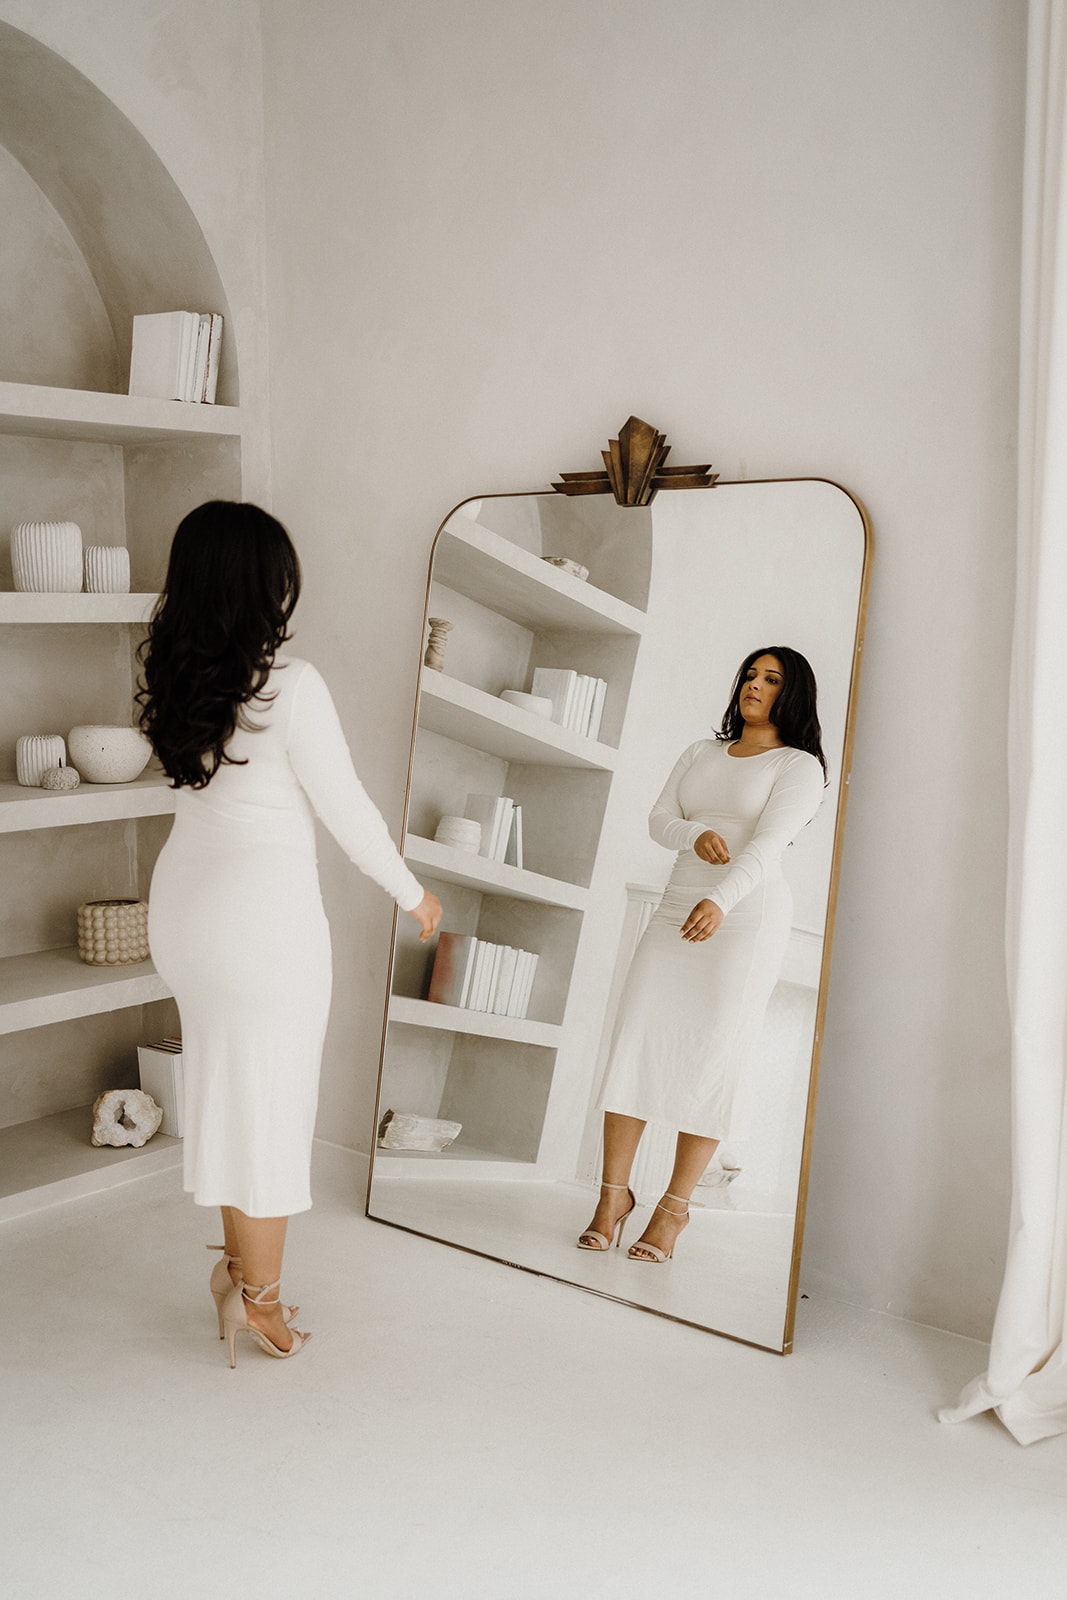 Lady standing in front of a mirror.